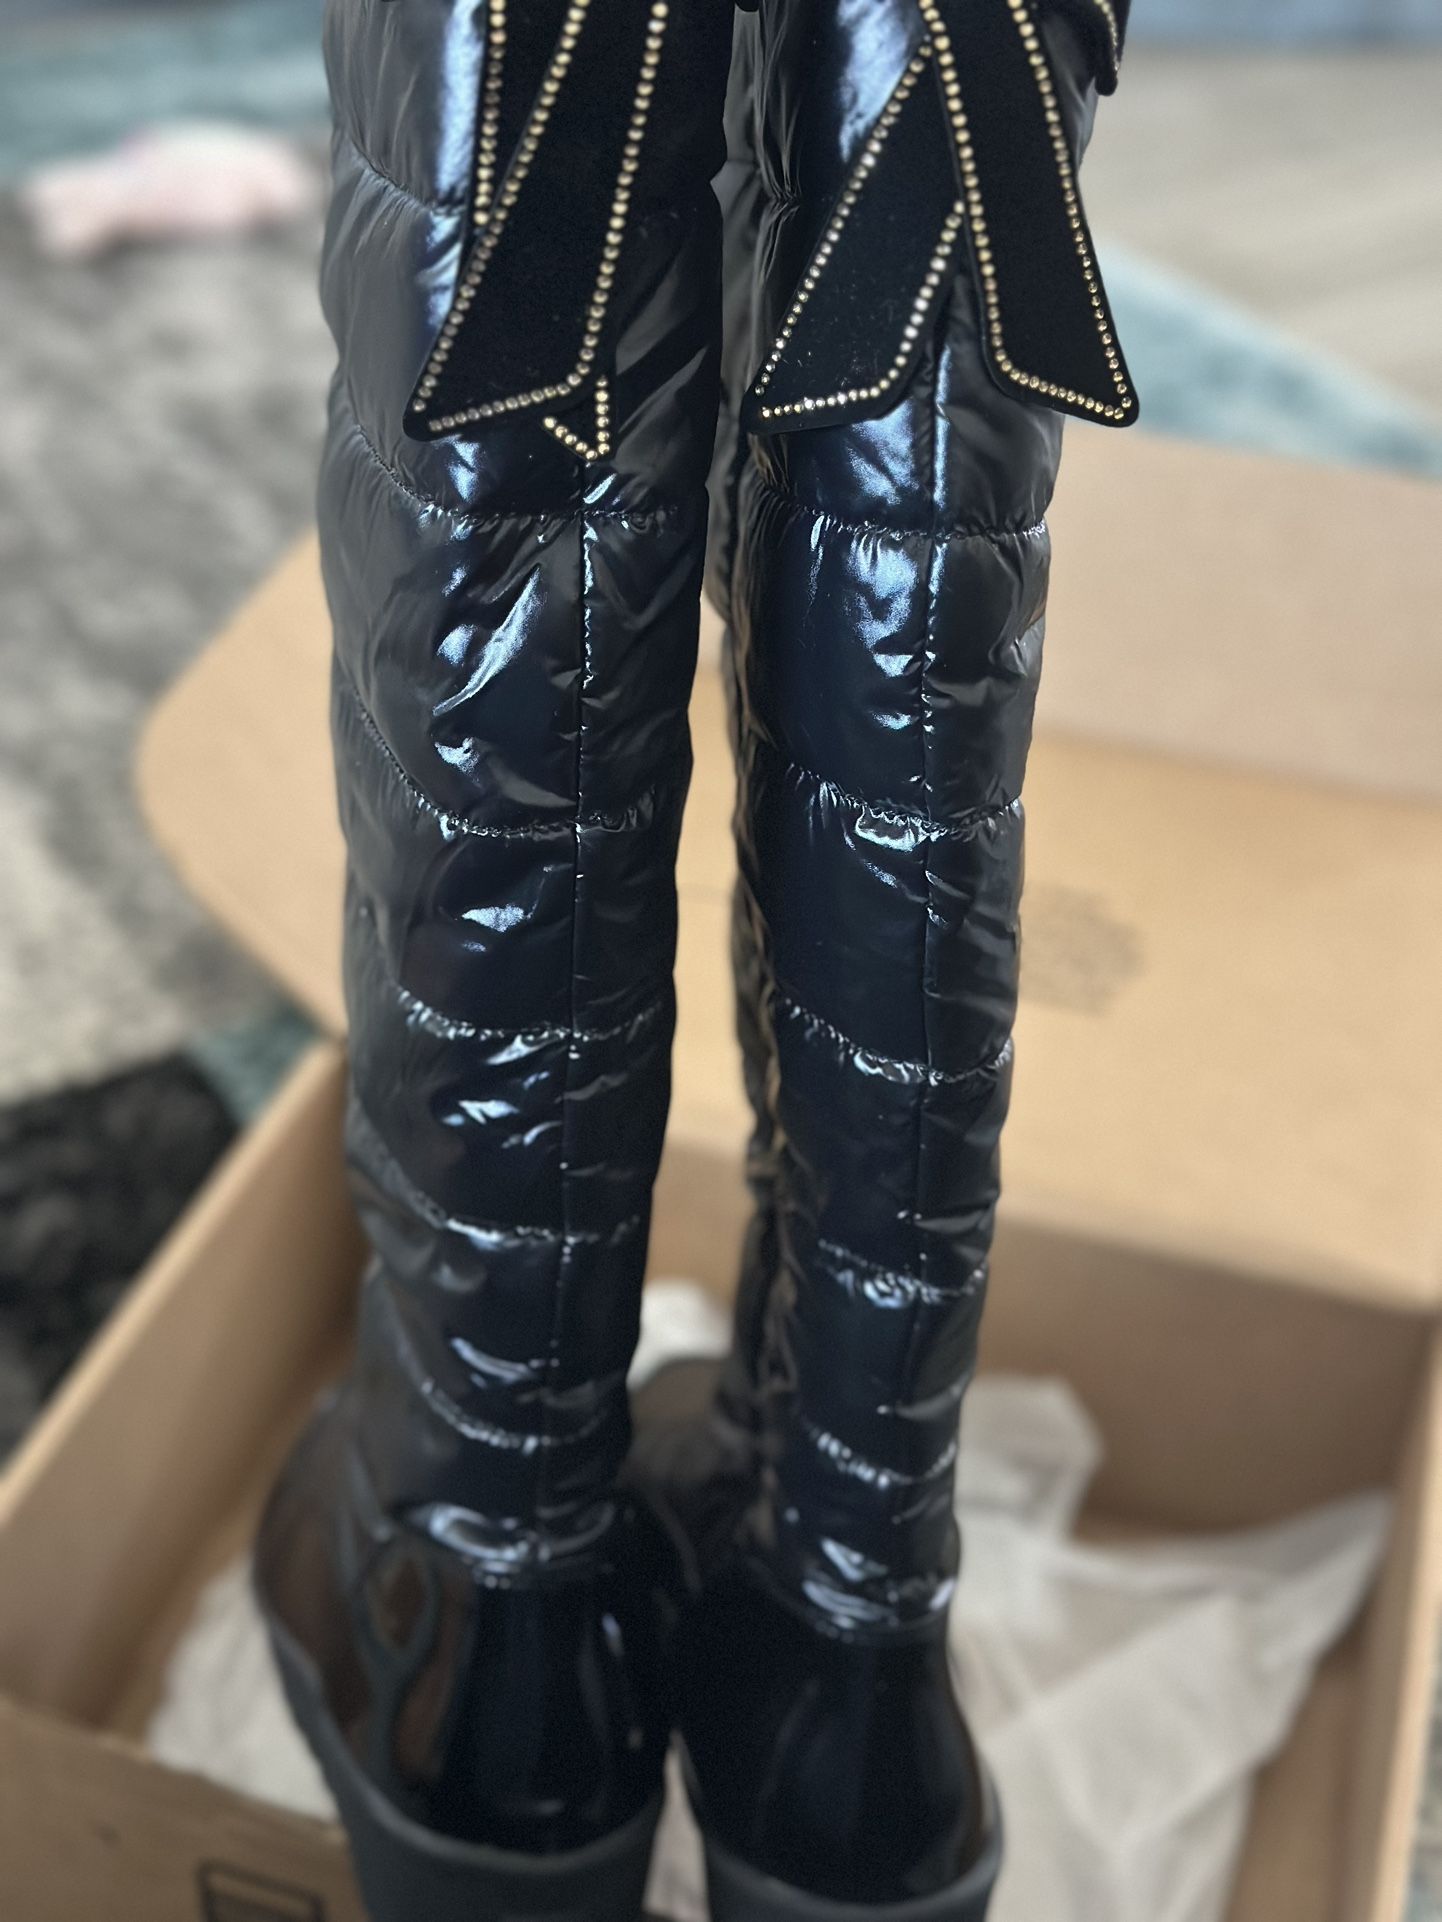 NWOT: over the knee womens boots